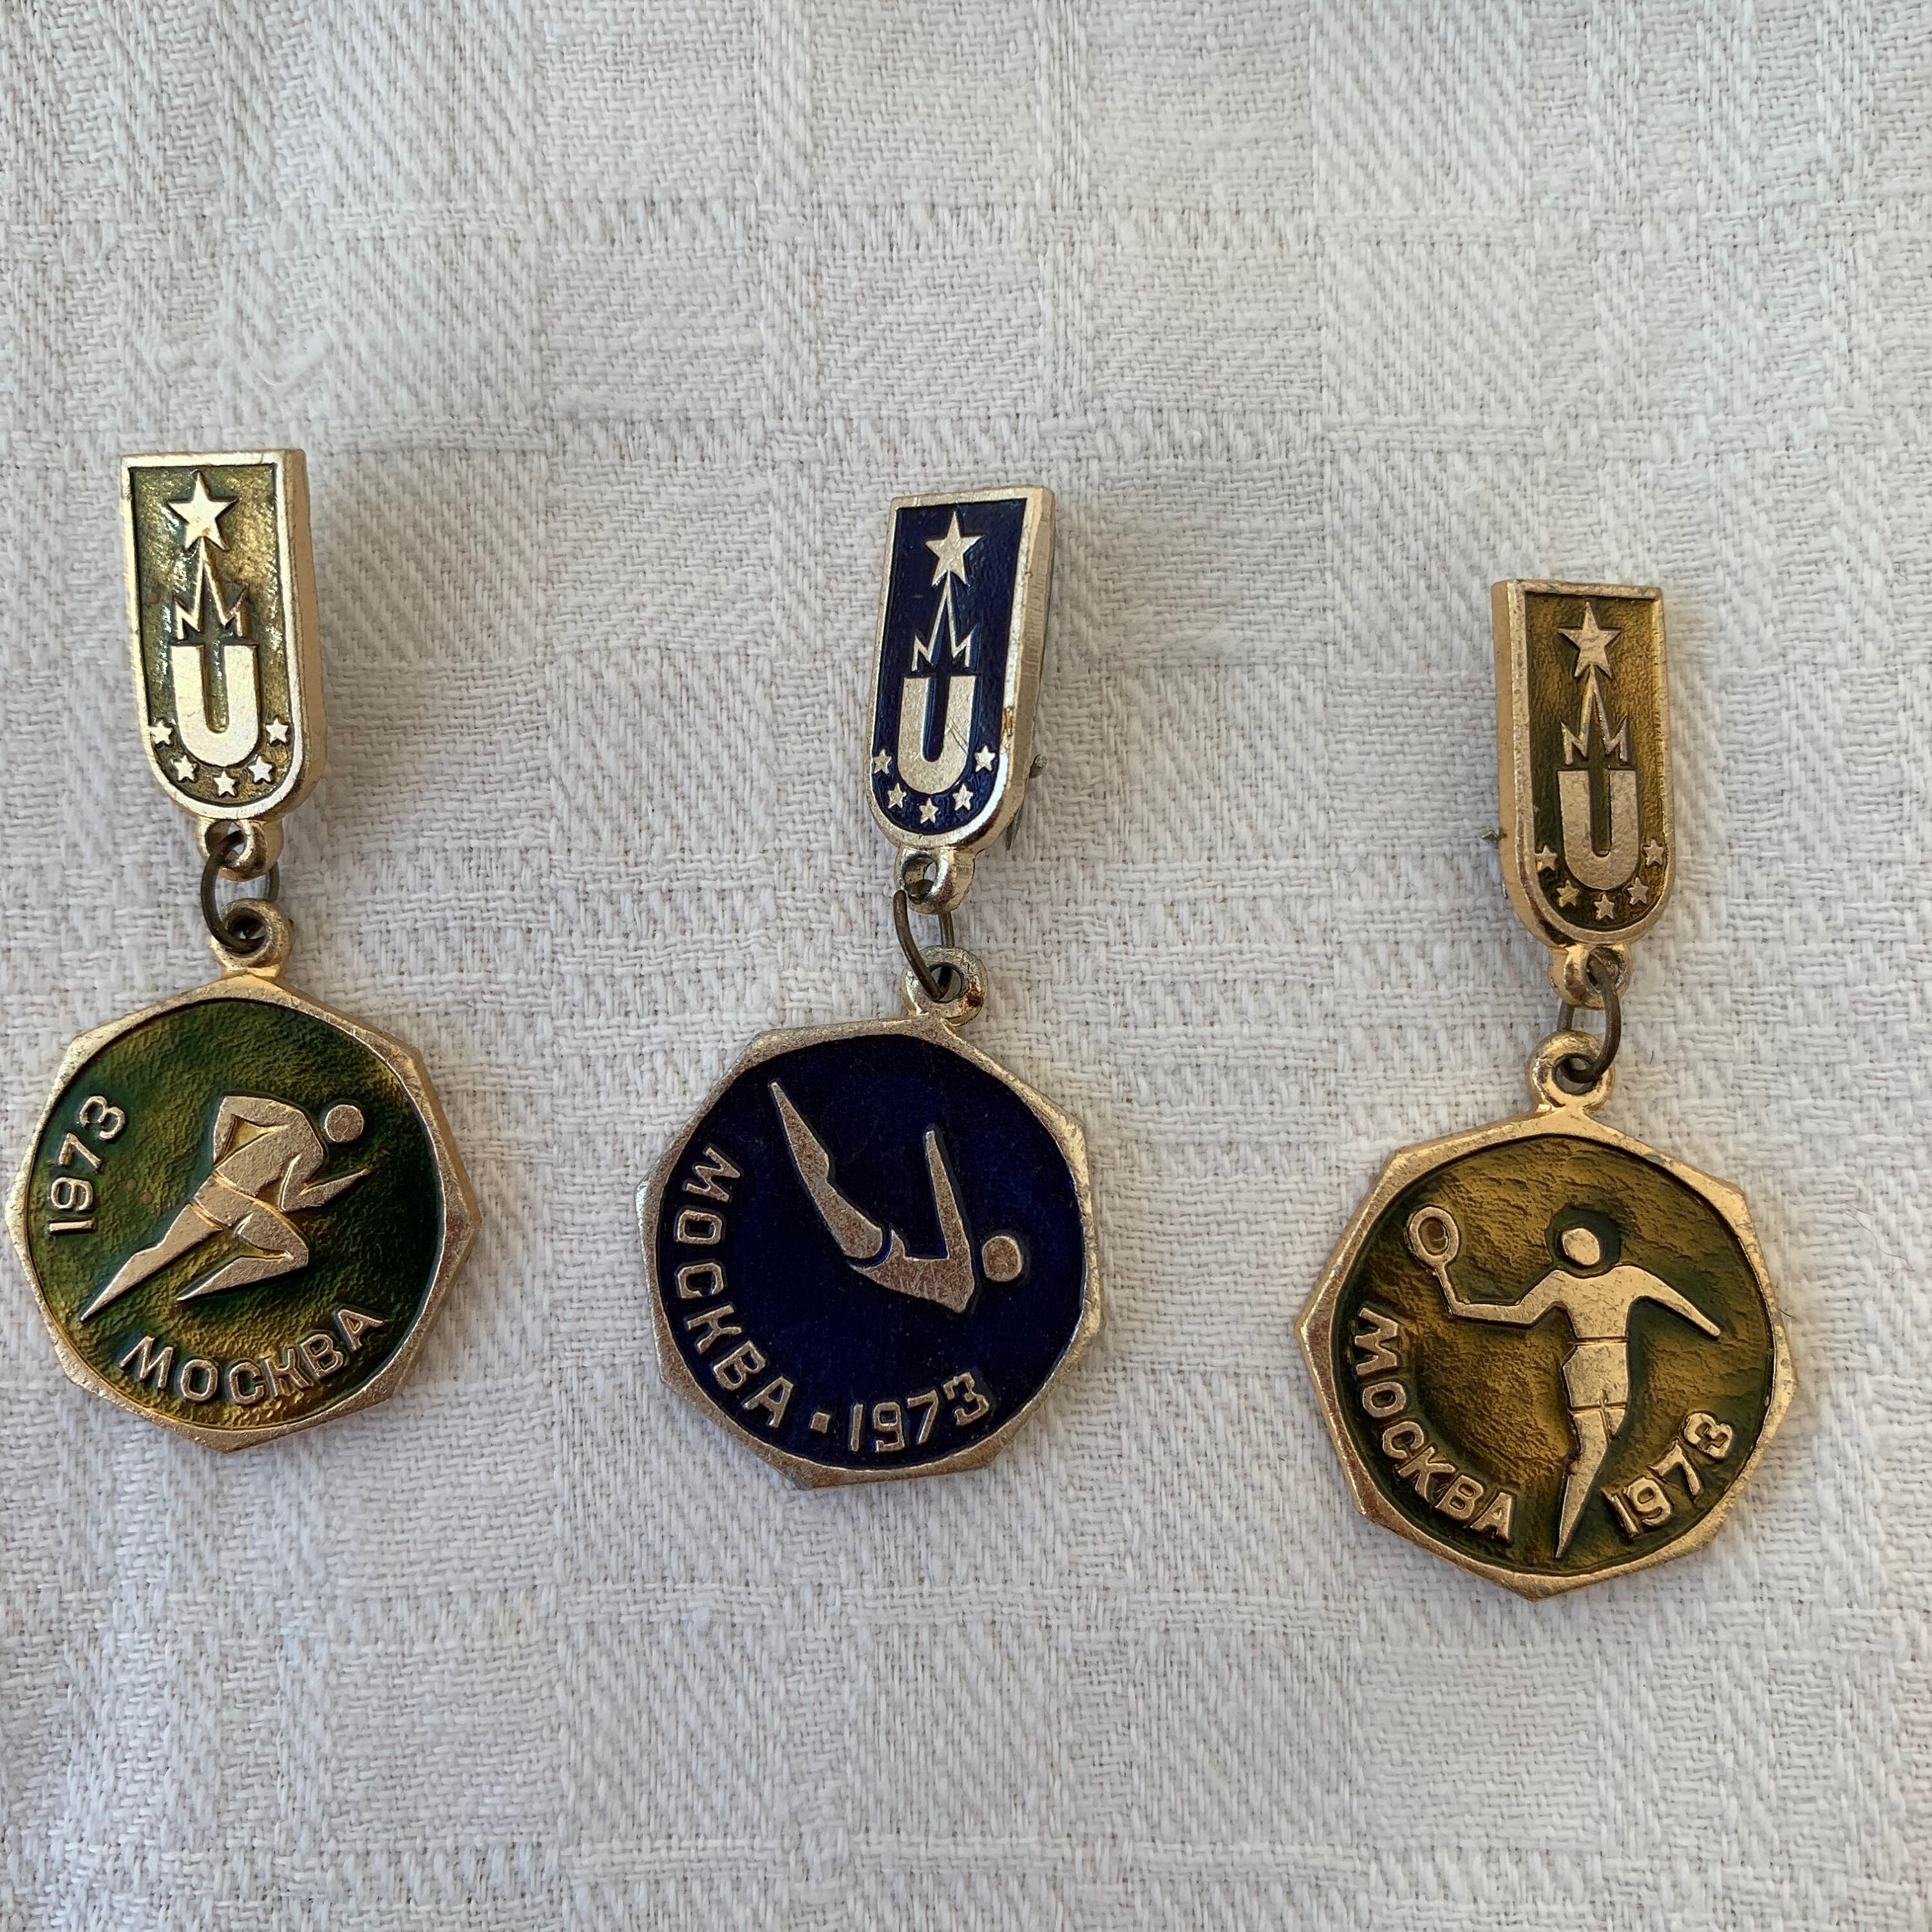 Aluminum Badges, Soviet Time, RSFSR Regional Championship, Moscow 1973 /  Old Badges / Sports Themes, Metallic Badge Collection, - Etsy